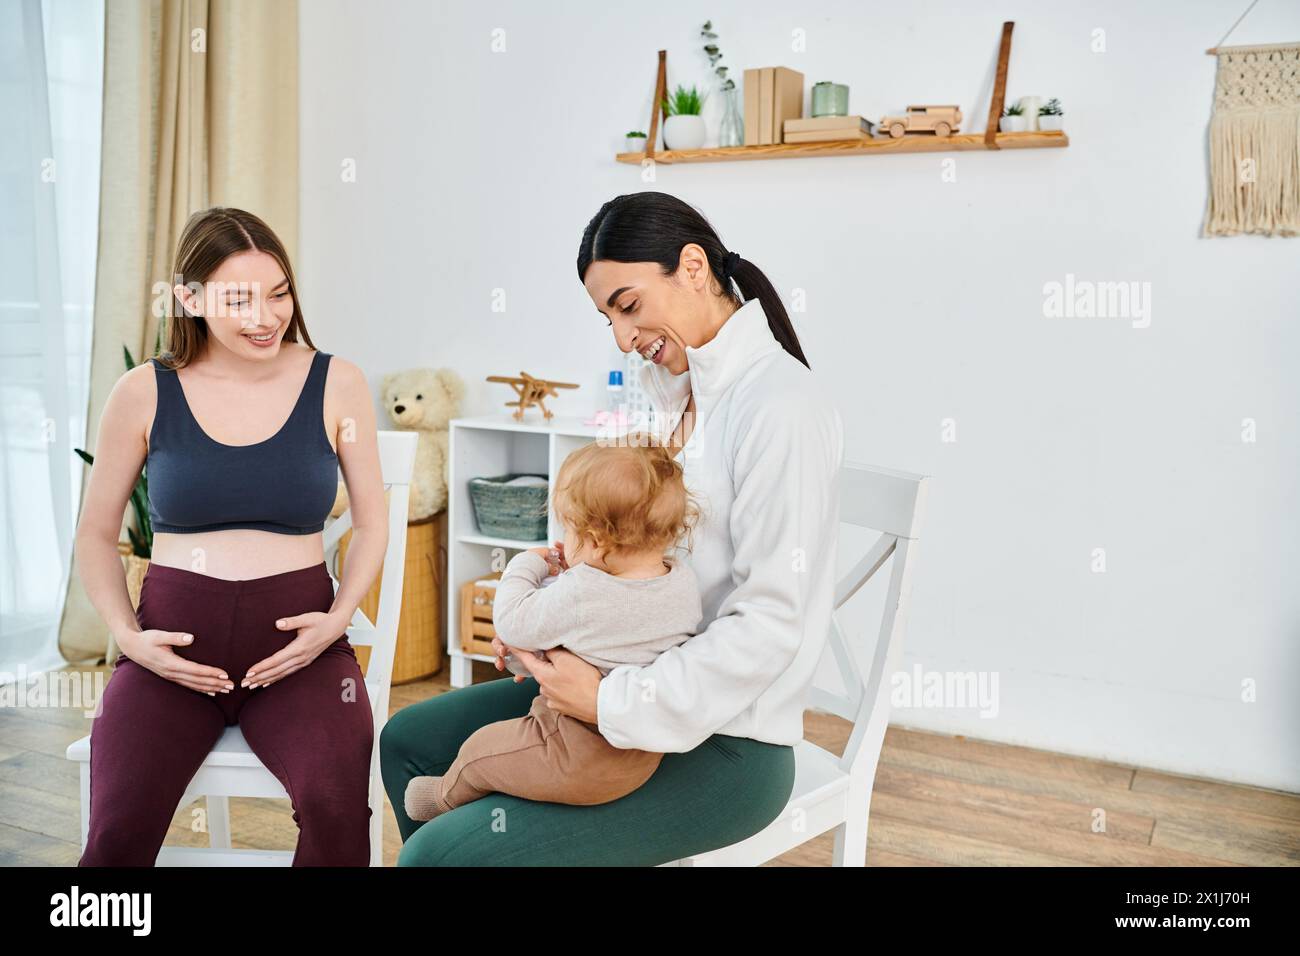 A young, beautiful mother sits in a chair holding her baby while receiving guidance from her parenting coach. Stock Photo